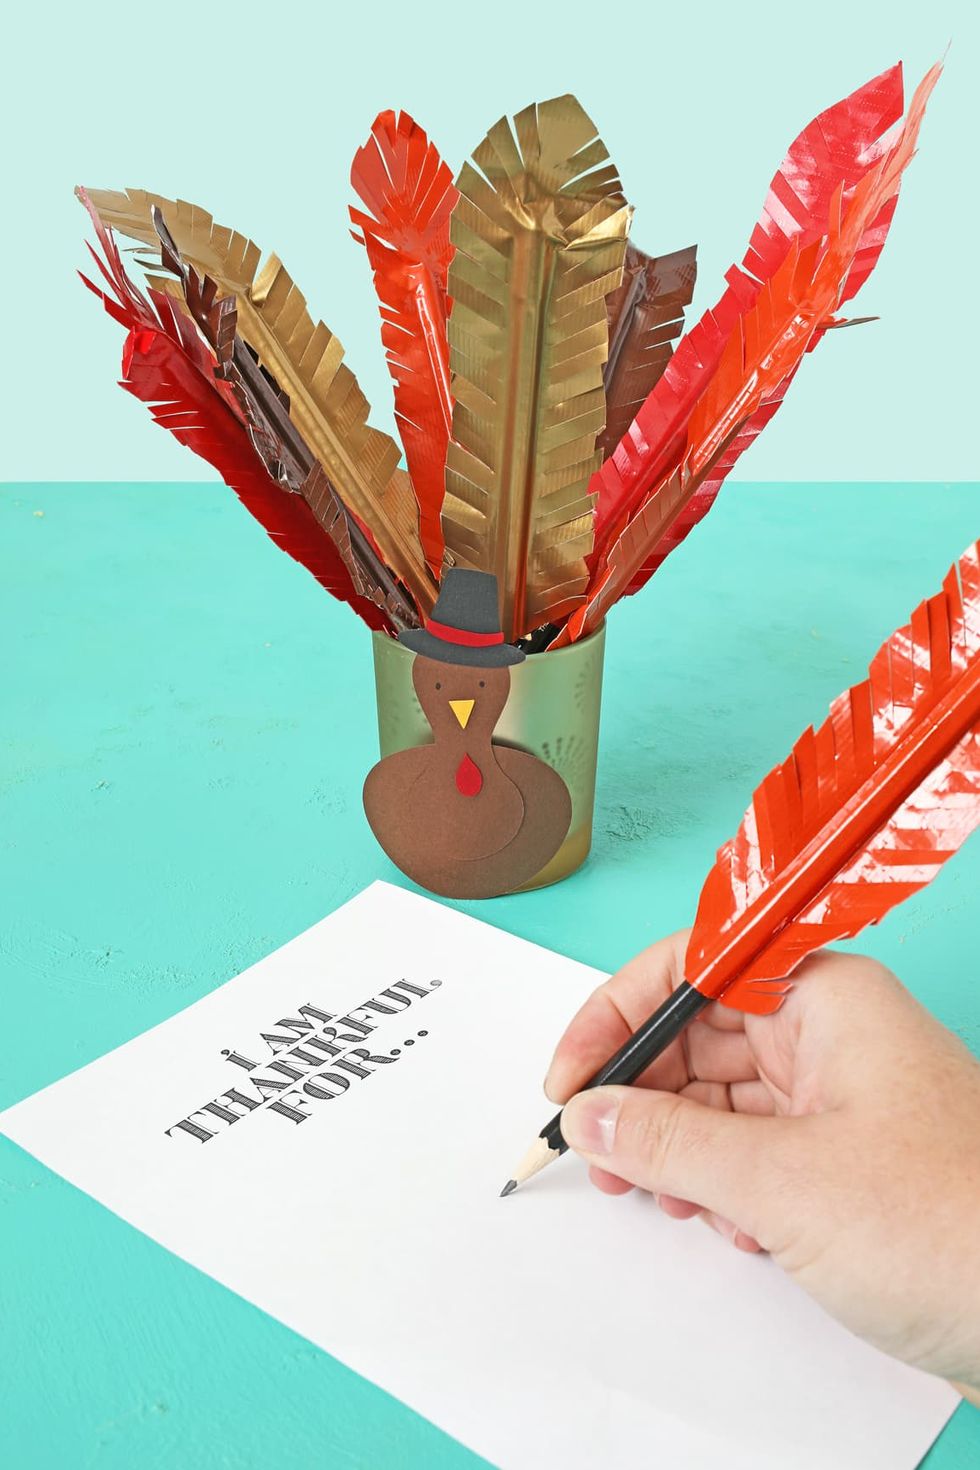 Toilet Paper Roll Turkey Kid Craft - The Resourceful Mama